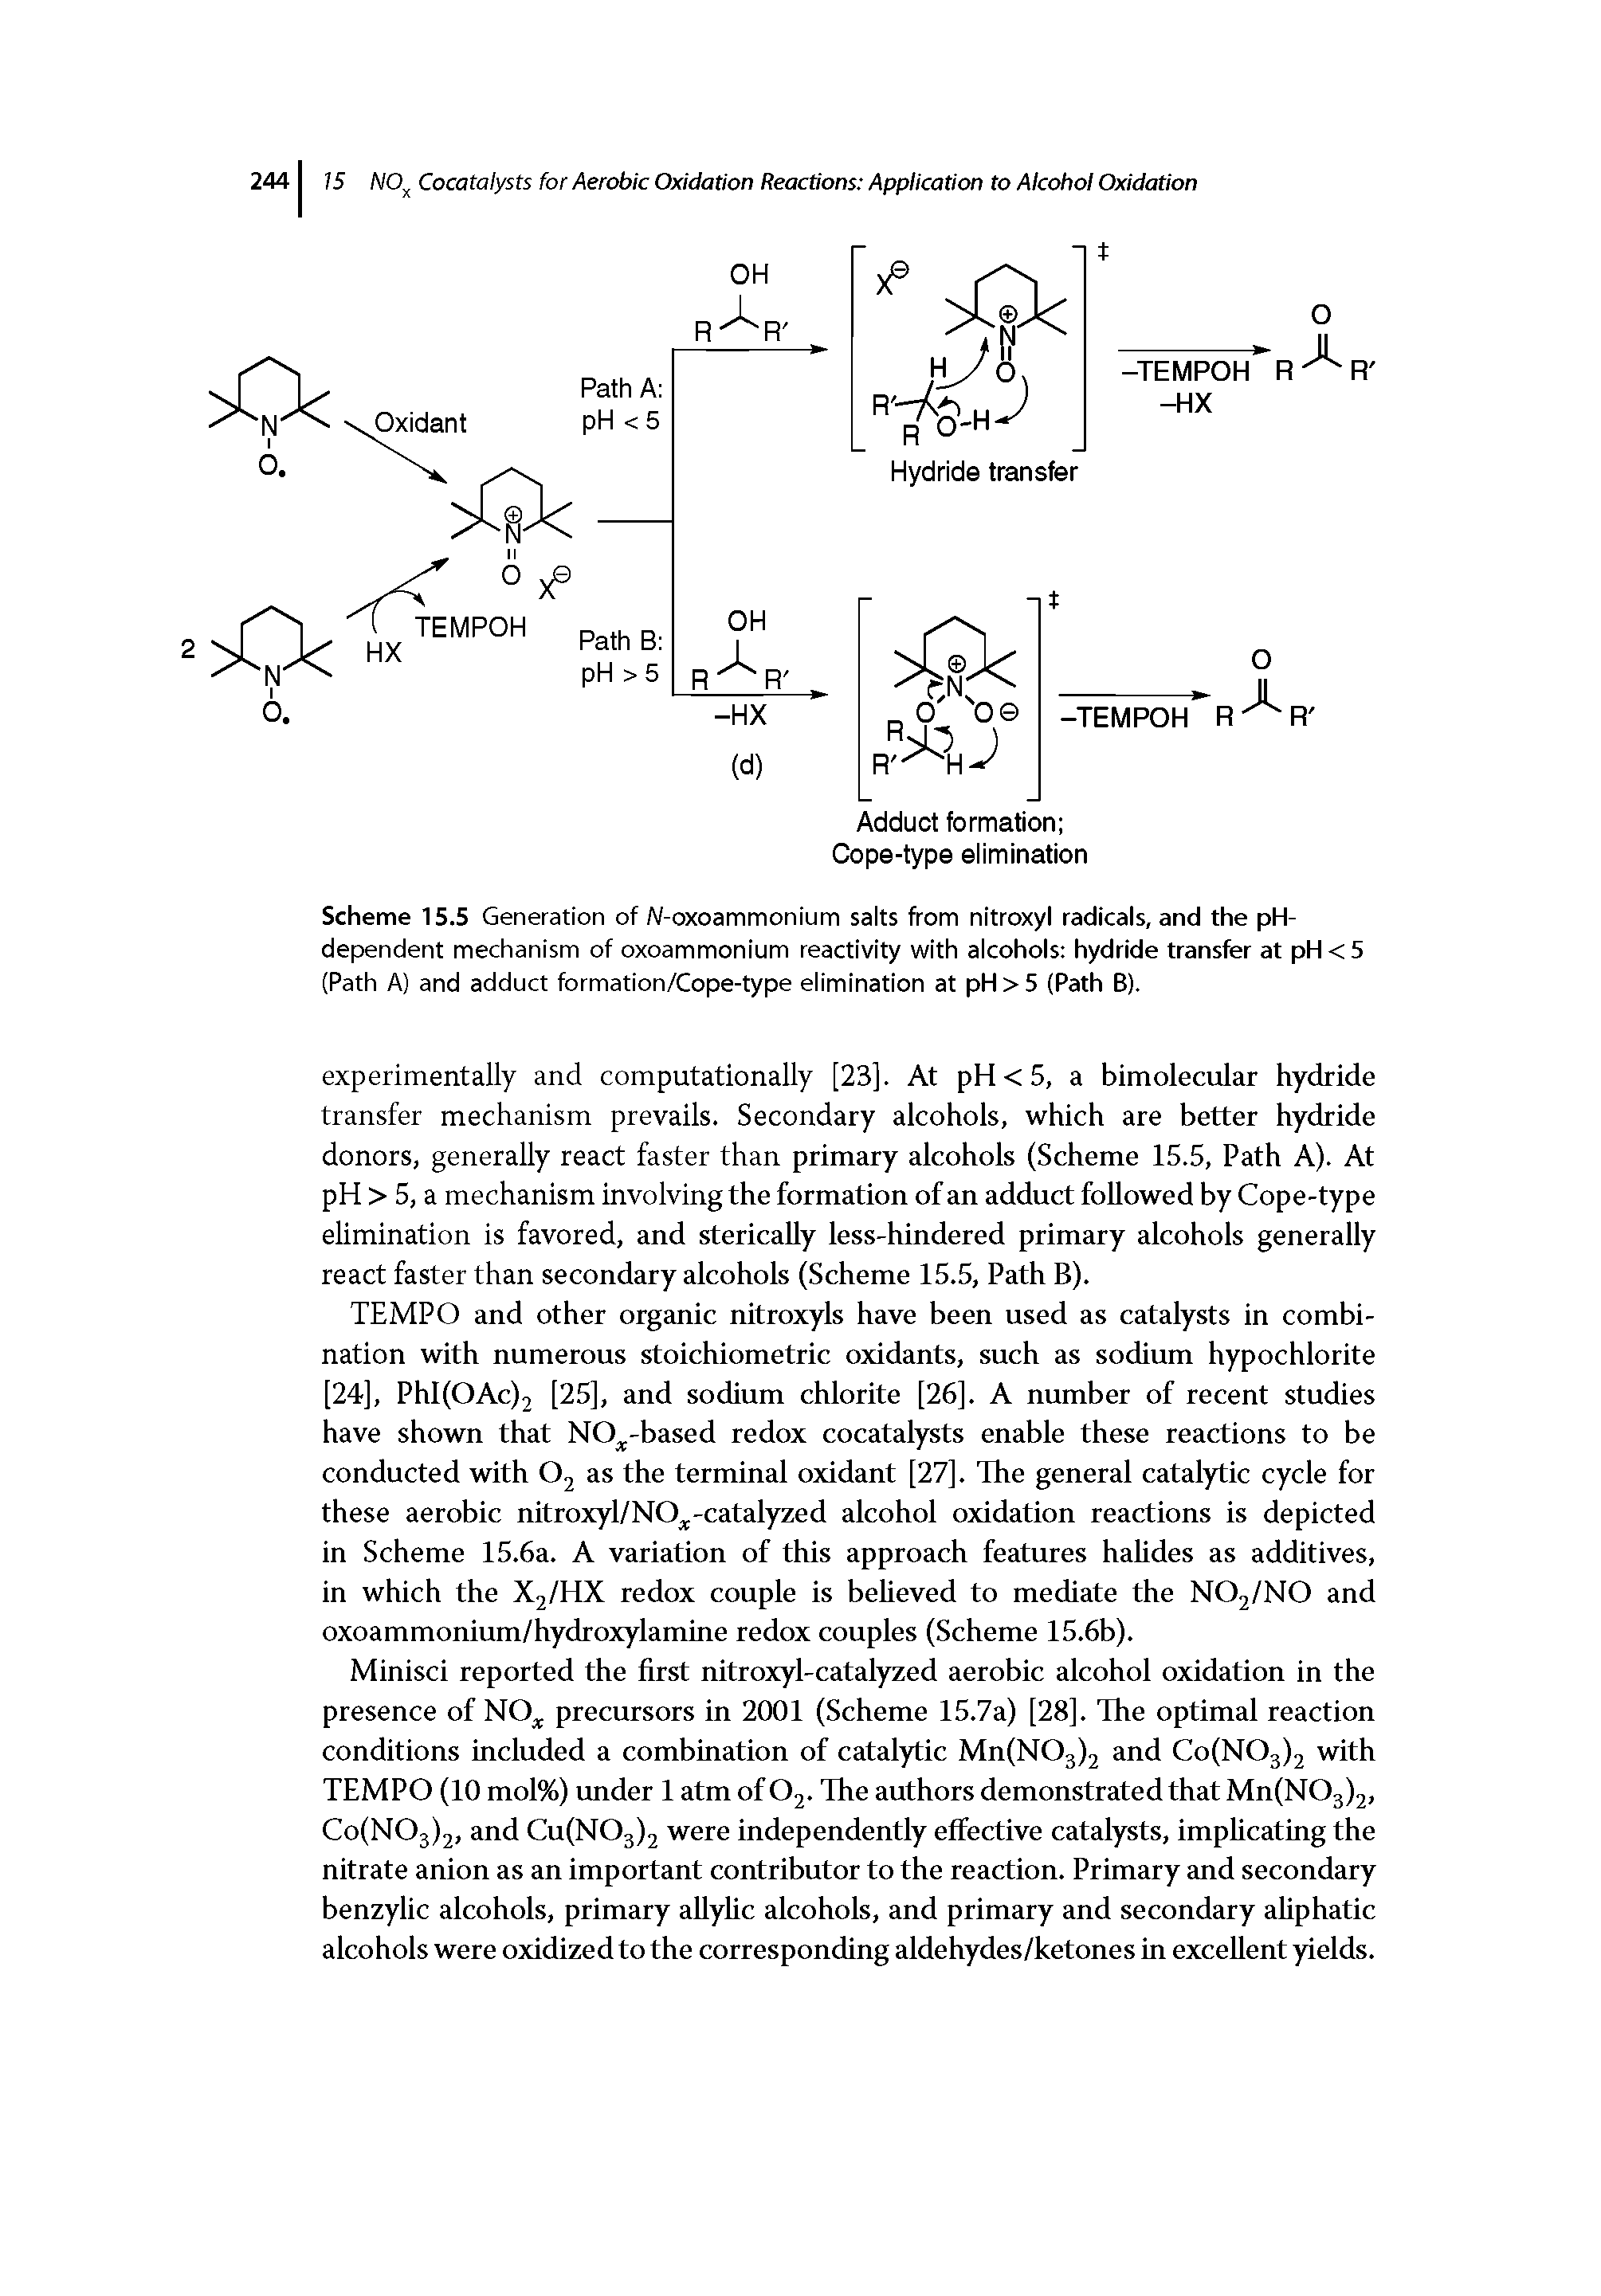 Scheme 15.5 Generation of A/-oxoammonium salts from nitroxyl radicals, and the pH-dependent mechanism of oxoammonium reactivity ith alcohols hydride transfer at pH < 5 (Path A) and adduct formation/Cope-type elimination at pH > 5 (Path B).